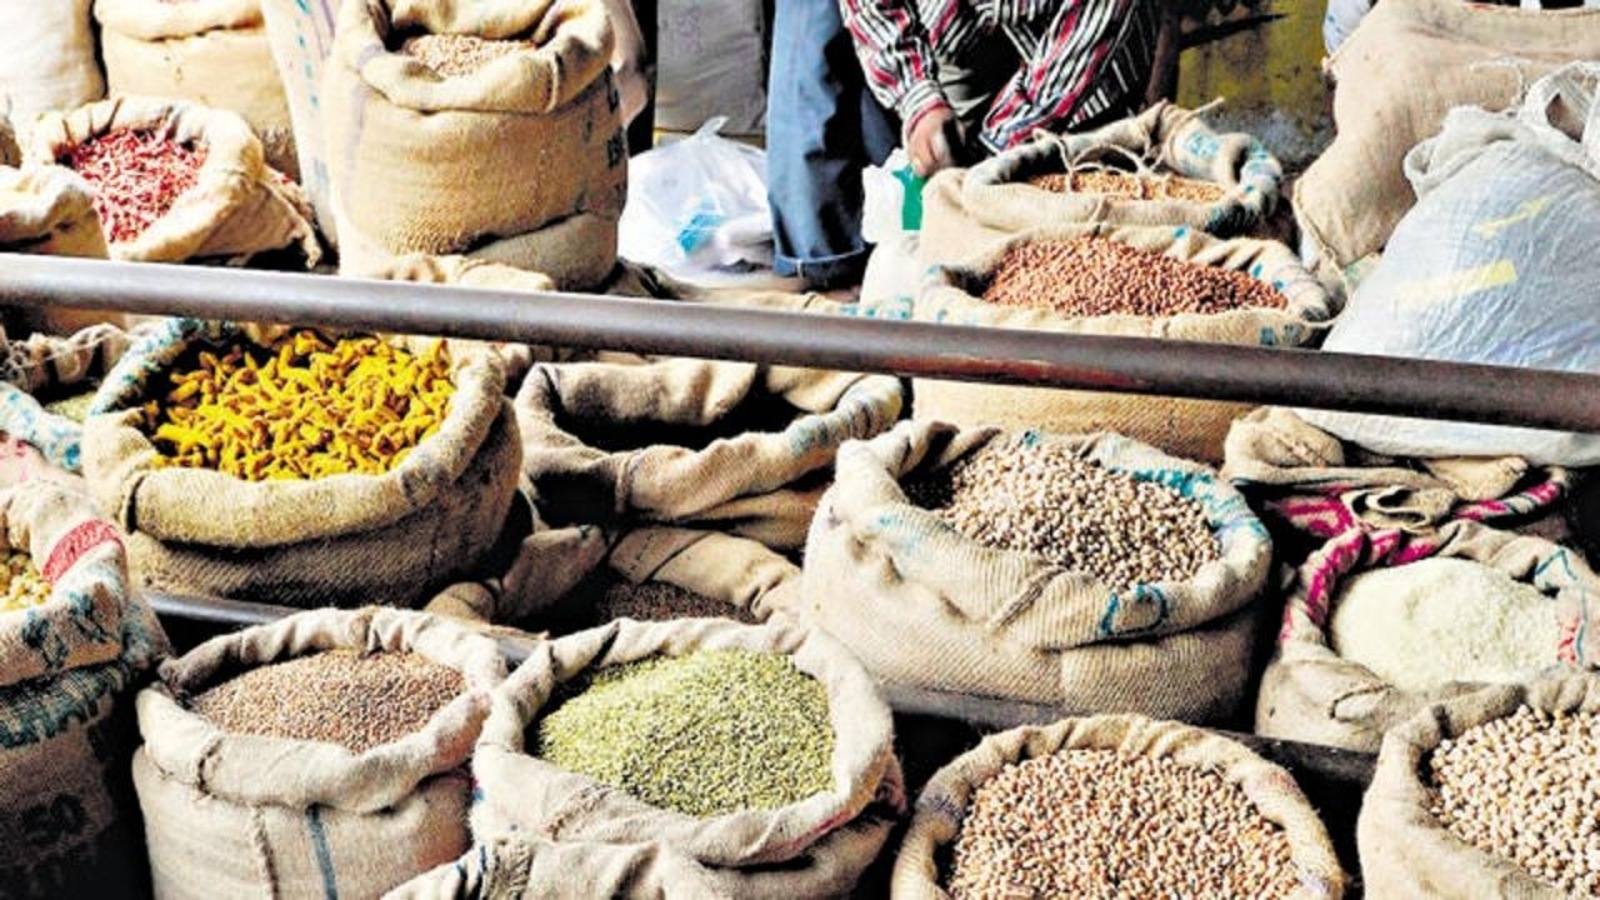 October consumer inflation (provisional) at 6.77%, down from 7.41% last month, says govt data